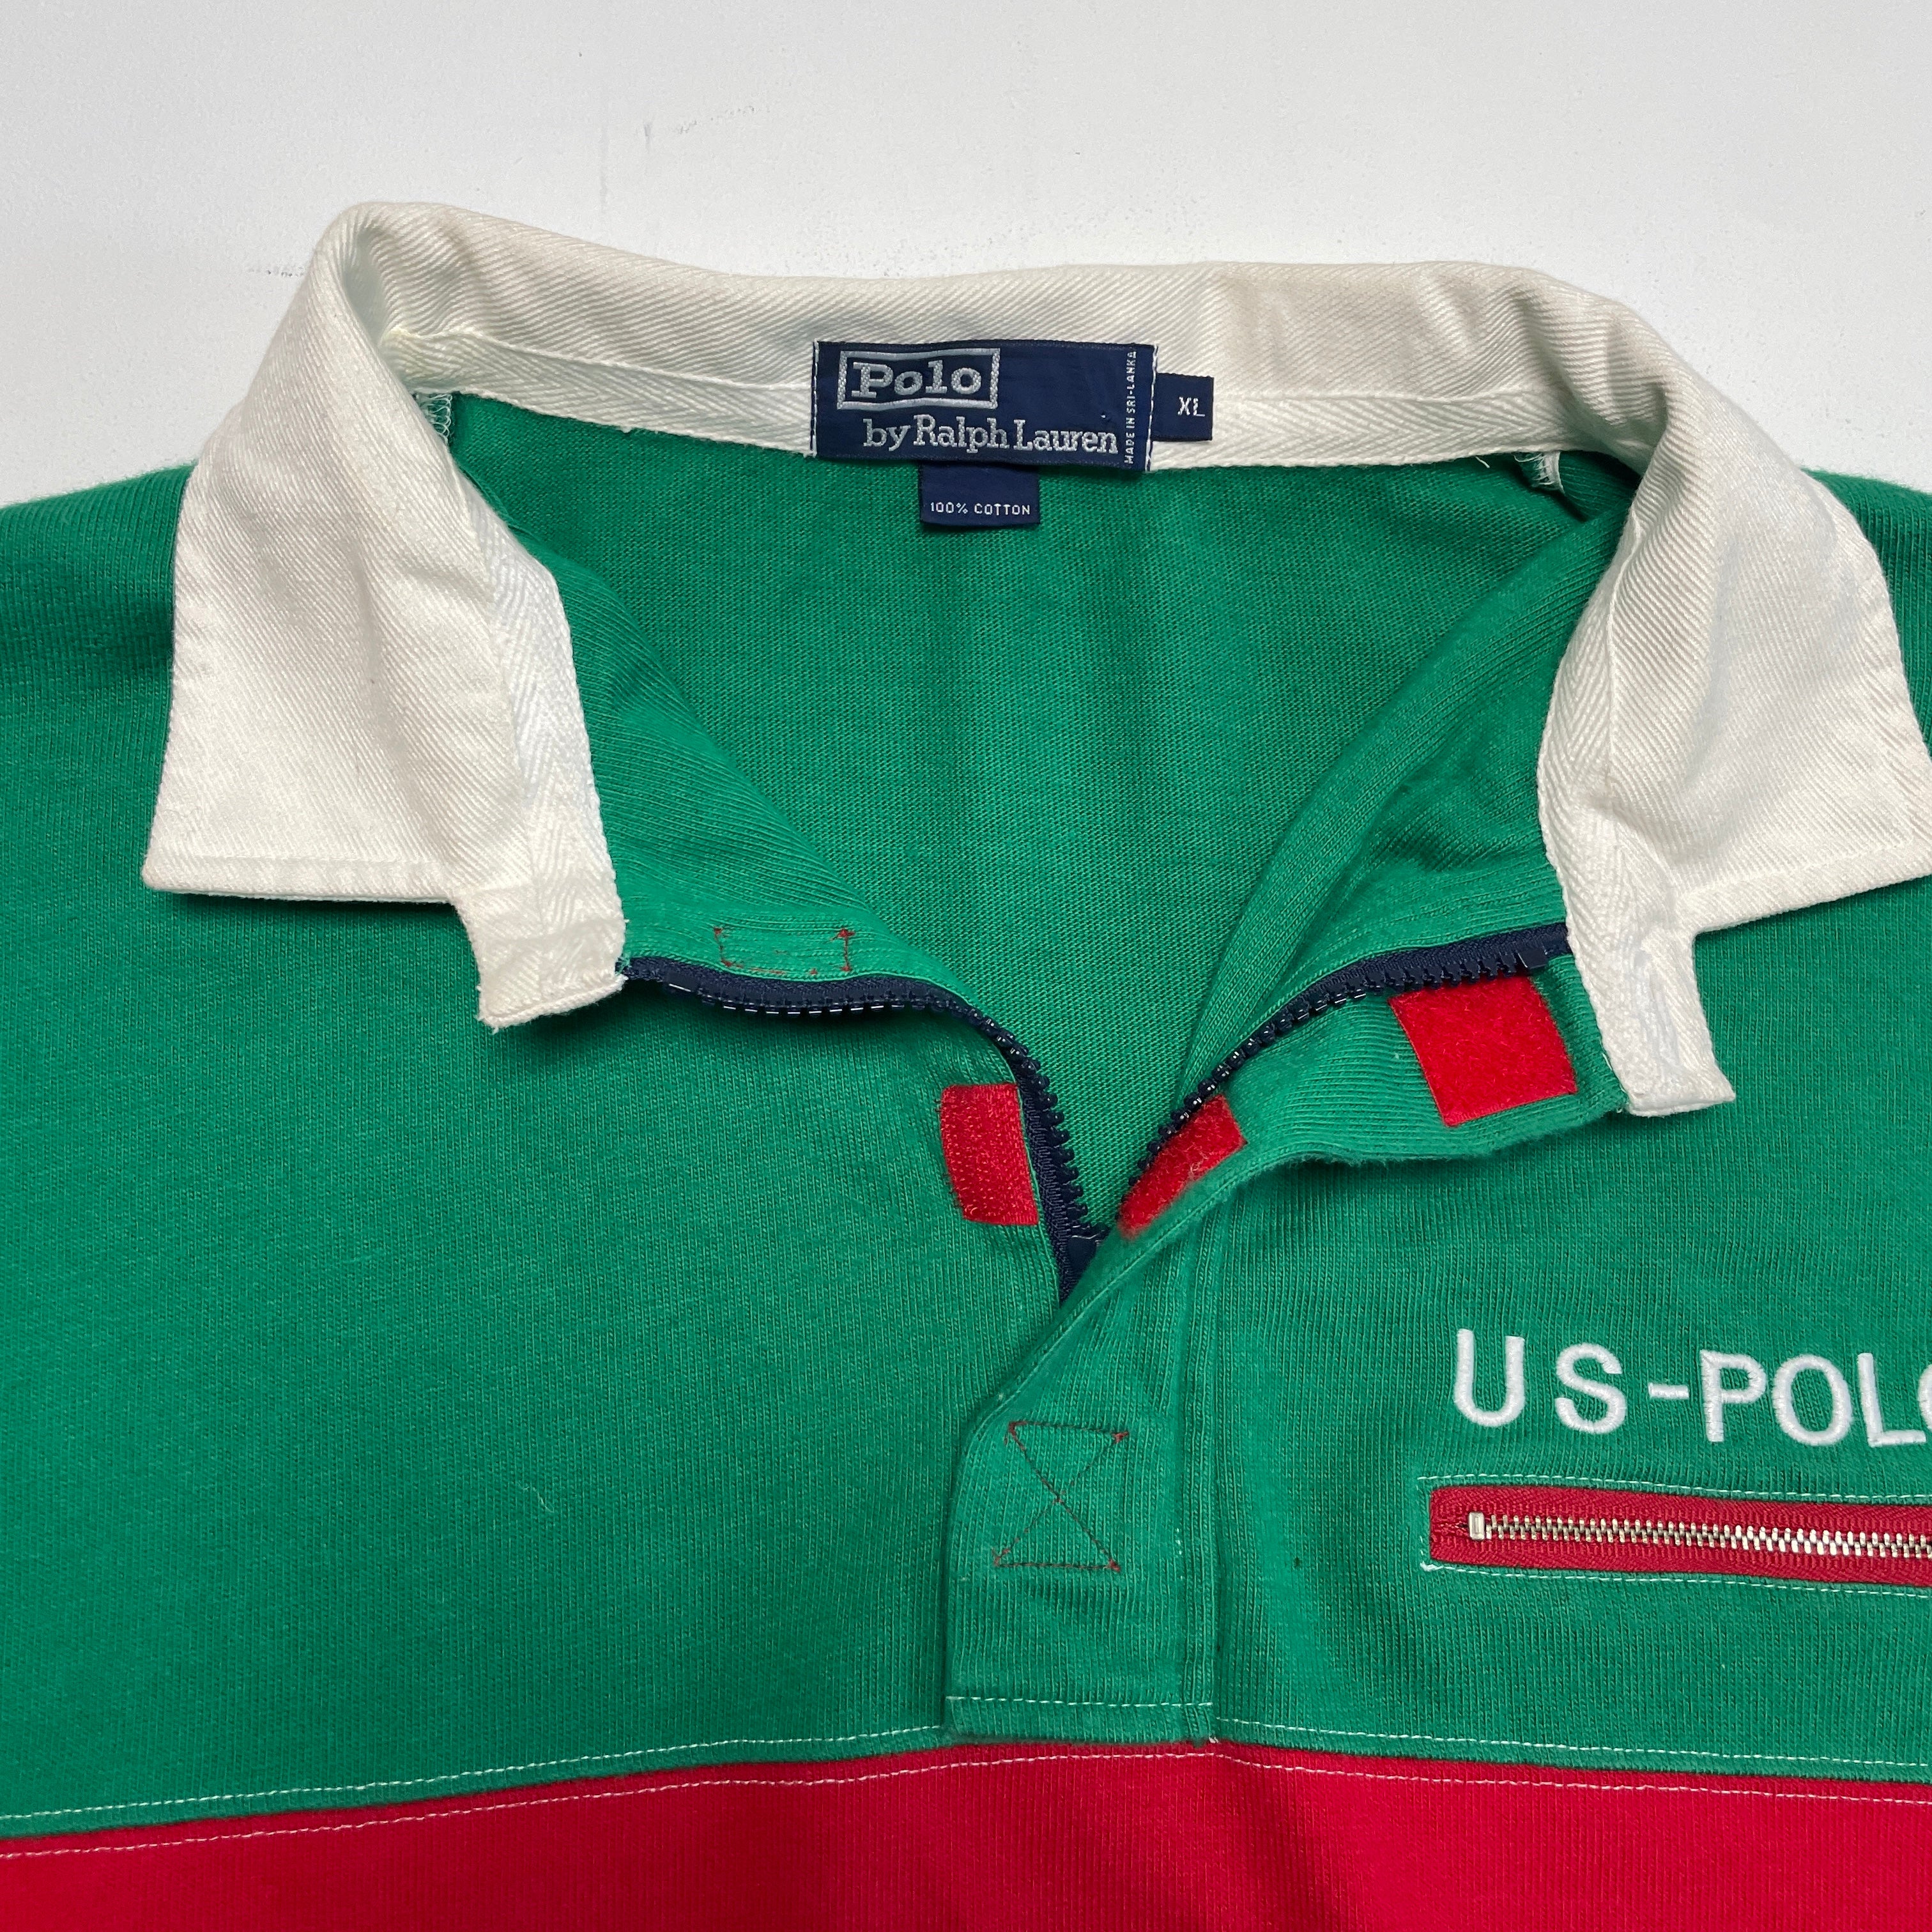 VNTG Polo Ralph Lauren (XL) RL-67 1993 US-POLO Colorblock Rugby 